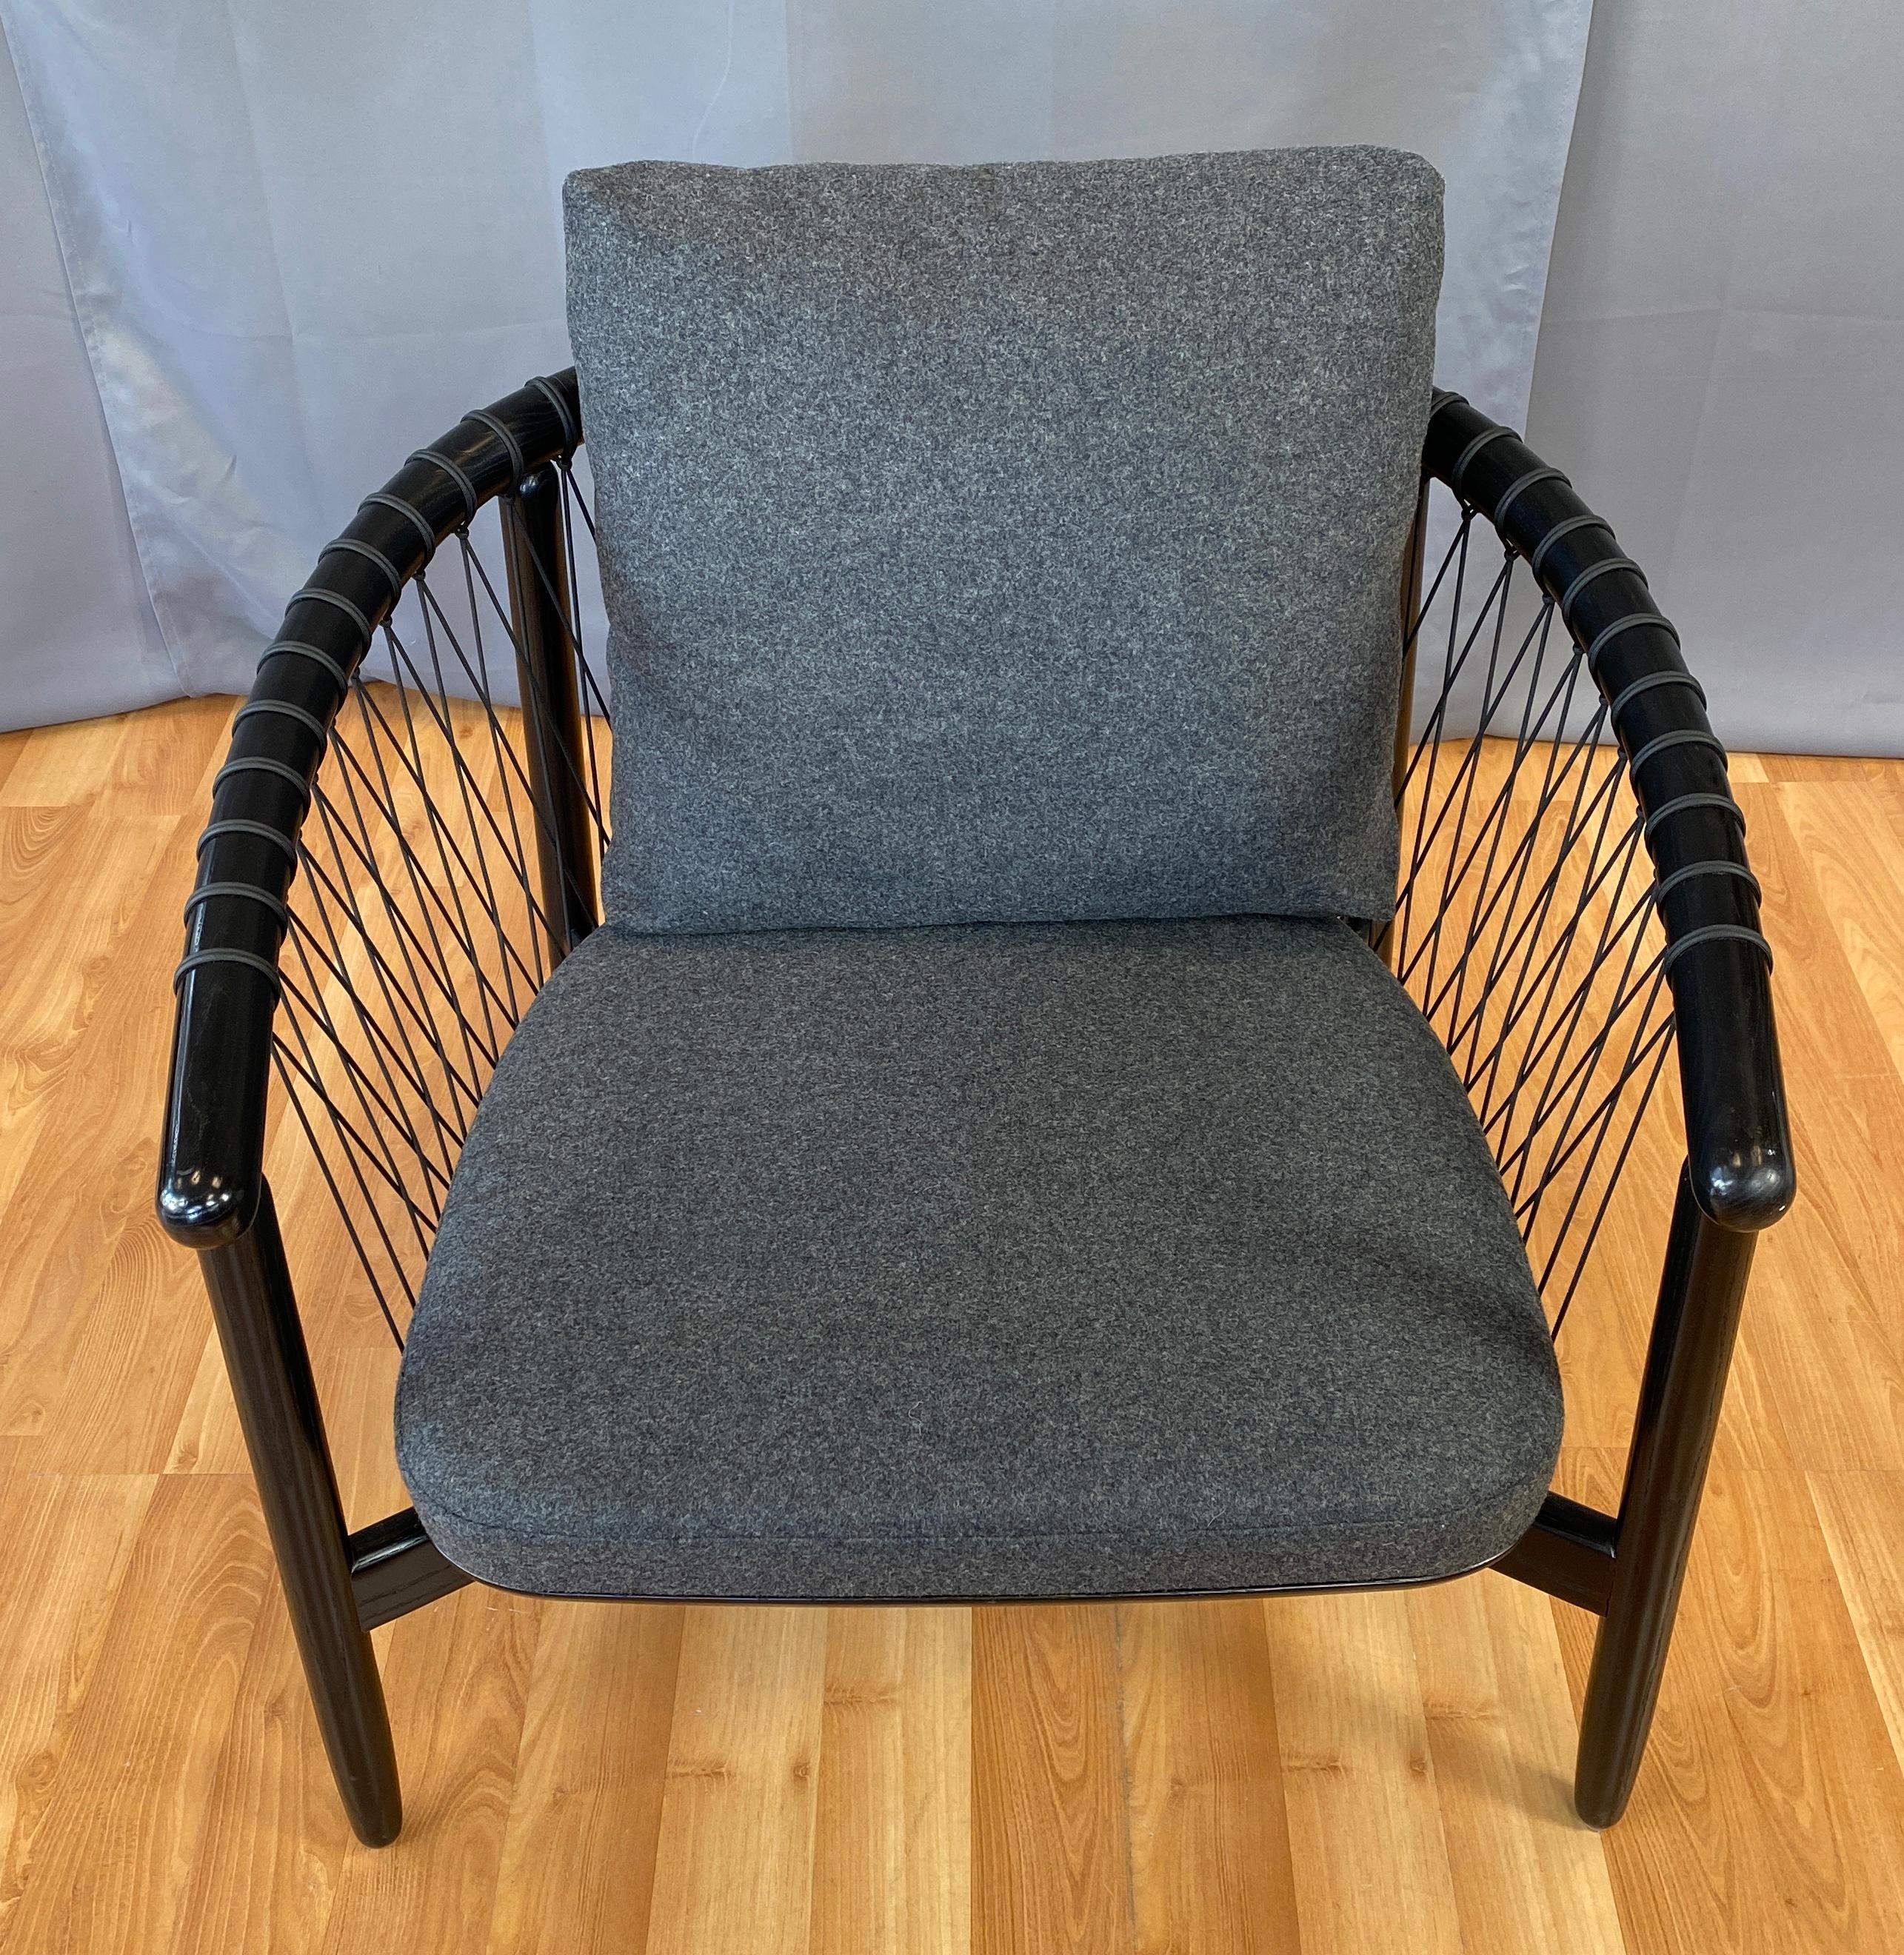 American Crosshatch Chair Designed by Eoos for Geiger from Herman Miller